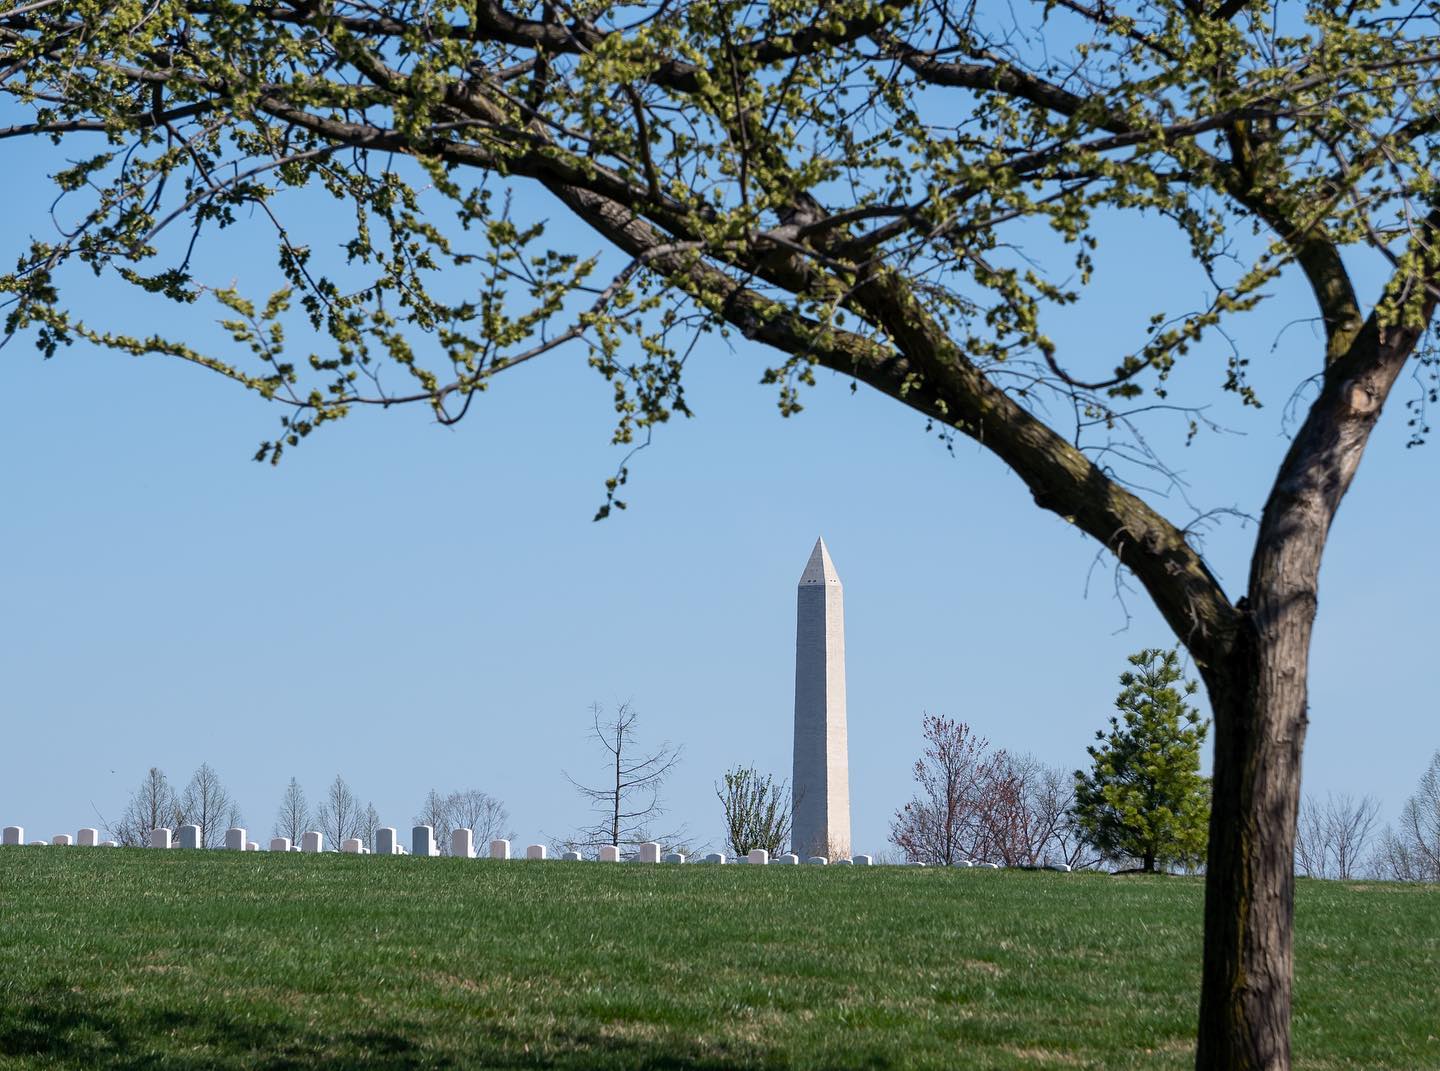 The Washington Monument appearing over McClellan Circle in Arlington National Cemetery. 

From the moment Washington D.C. was named the nation's capital, people started envisioning ways to honor America's first president. Pierre L'Enfant, the man tasked with designing what was first called ''Federal City'', created a geometric layout of streets, buildings and green spaces. One space, however, he left empty. If you draw straight lines south from the White House and west from the Capitol, that's the spot. L'Enfant left it open so a great monument to George Washington could one day be built there. Long story short: one was.

Construction began in 1848 but came to a halt from 1854 to 1877 owing to lack of funds, the Civil War, and other difficulties. By then, Mills’s design had been radically simplified for aesthetic as well as financial reasons. When construction resumed under the supervision of Col. Thomas Lincoln Casey (1831–1896) of the Army Corps of Engineers, all decorative elements and inscriptions were eliminated and the height of the monument was scaled back to just over 555 feet, 5 inches. 

Nevertheless, upon completion in 1884, the Washington Monument was the tallest built structure in the world and it remains the tallest building in Washington, DC. 

Today, it can be seen from many parts of the cemetery. A testament to our great nation and the veterans that gave their lives for it. 

PC: @arlingtonmedia